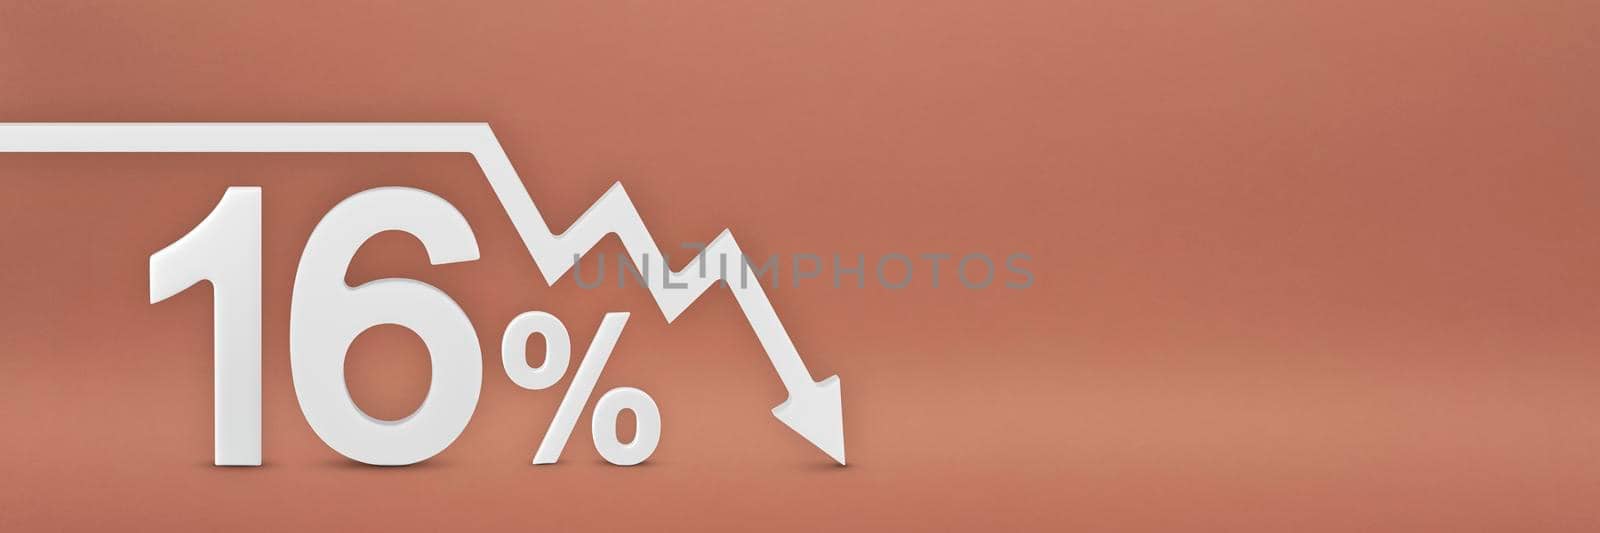 sixteen percent, the arrow on the graph is pointing down. Stock market crash, bear market, inflation. Economic collapse, collapse of stocks. 3d banner, 16 percent discount sign on a red background